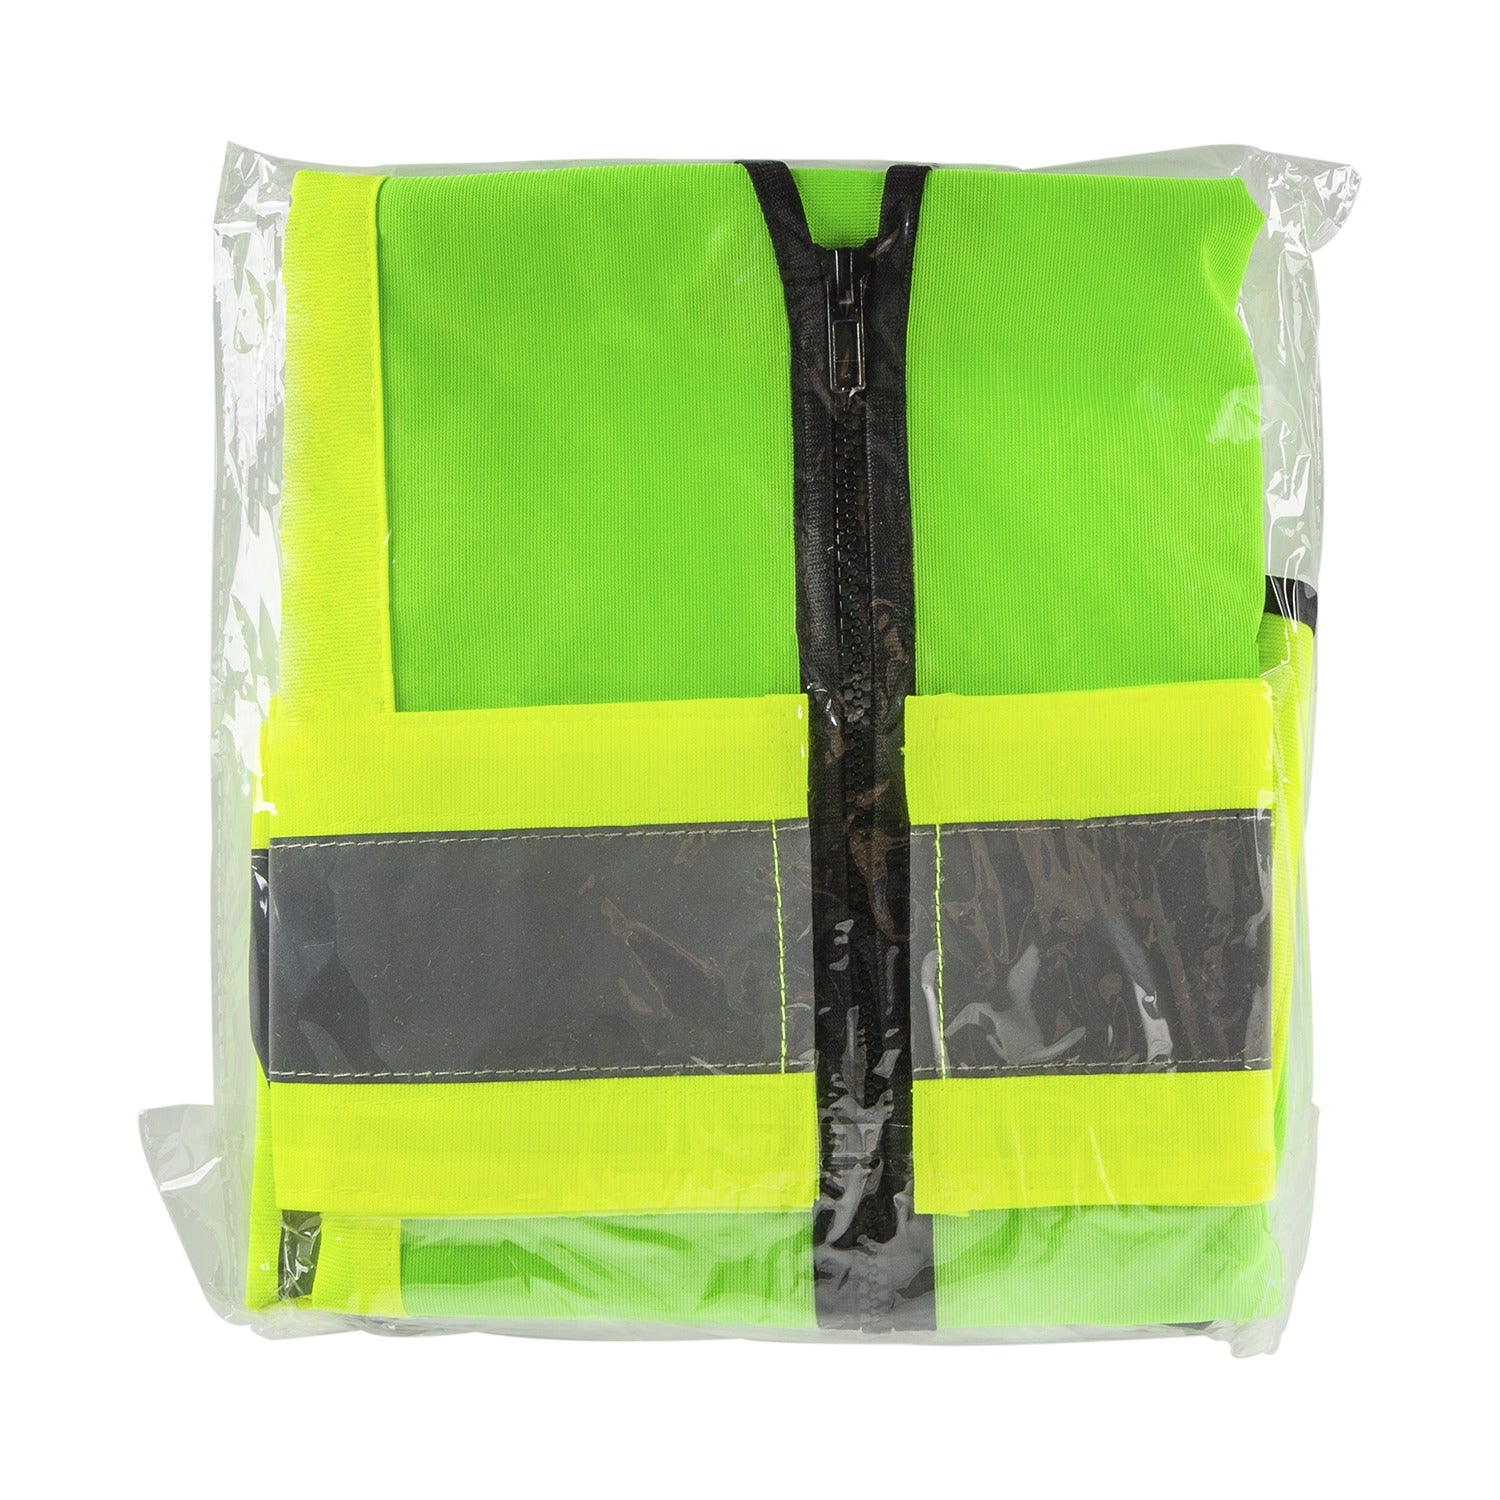 Karat High Visibility Reflective Safety Vest with Zipper Fastening, Green - X-Large, Size: XL